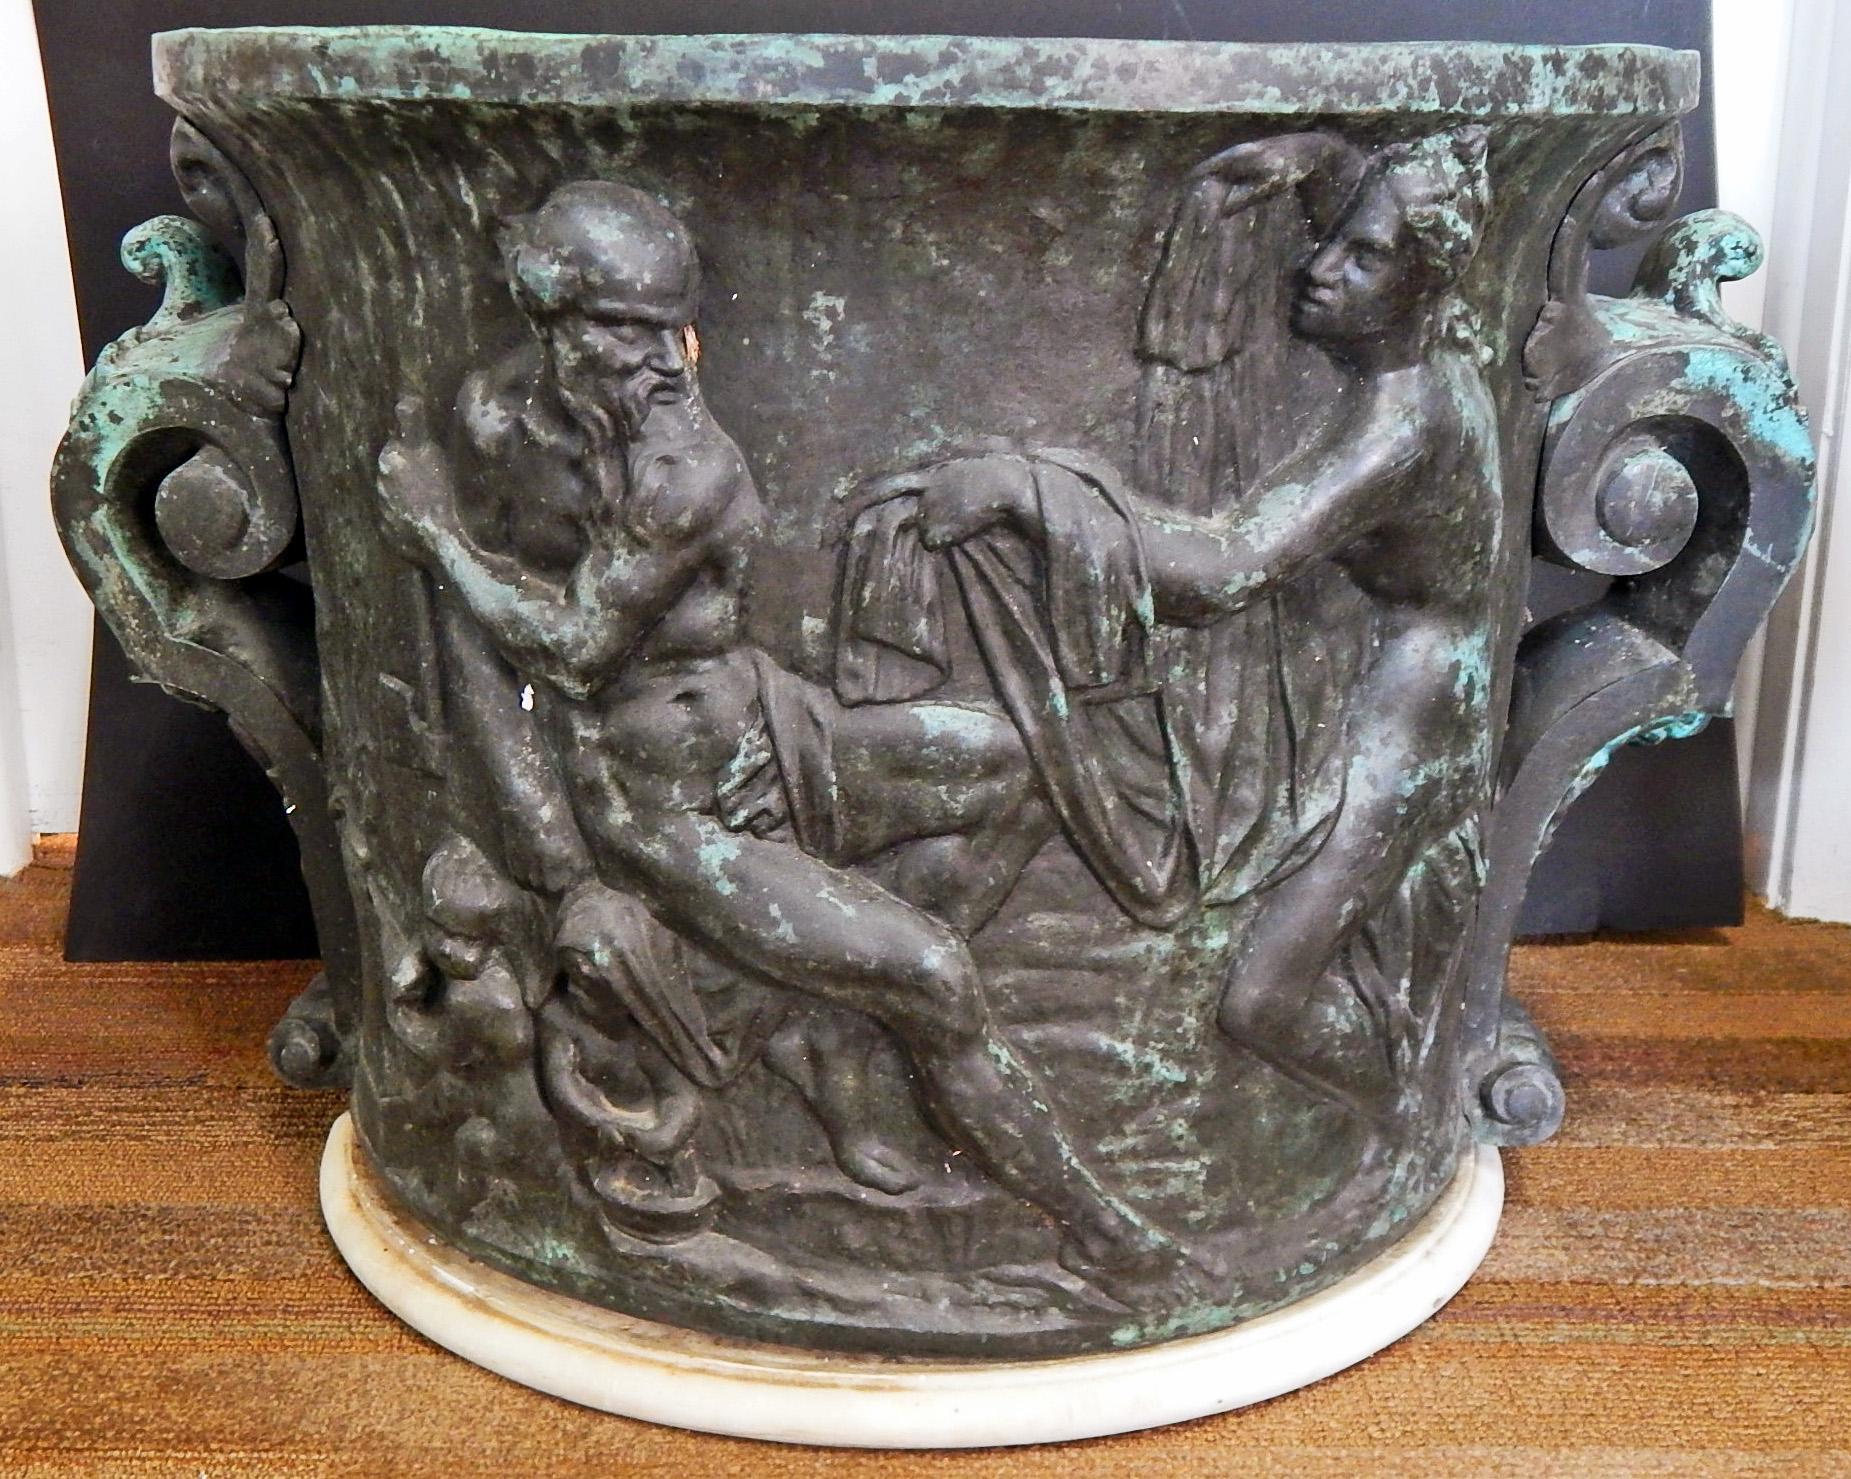 Beautifully sculpted and cast, this large and remarkable bronze urn is enlivened with a series of nude mythological figures in bas relief, the dark bronze color highlighted with areas of verdigris, indicating that it sat in an outdoor garden. The